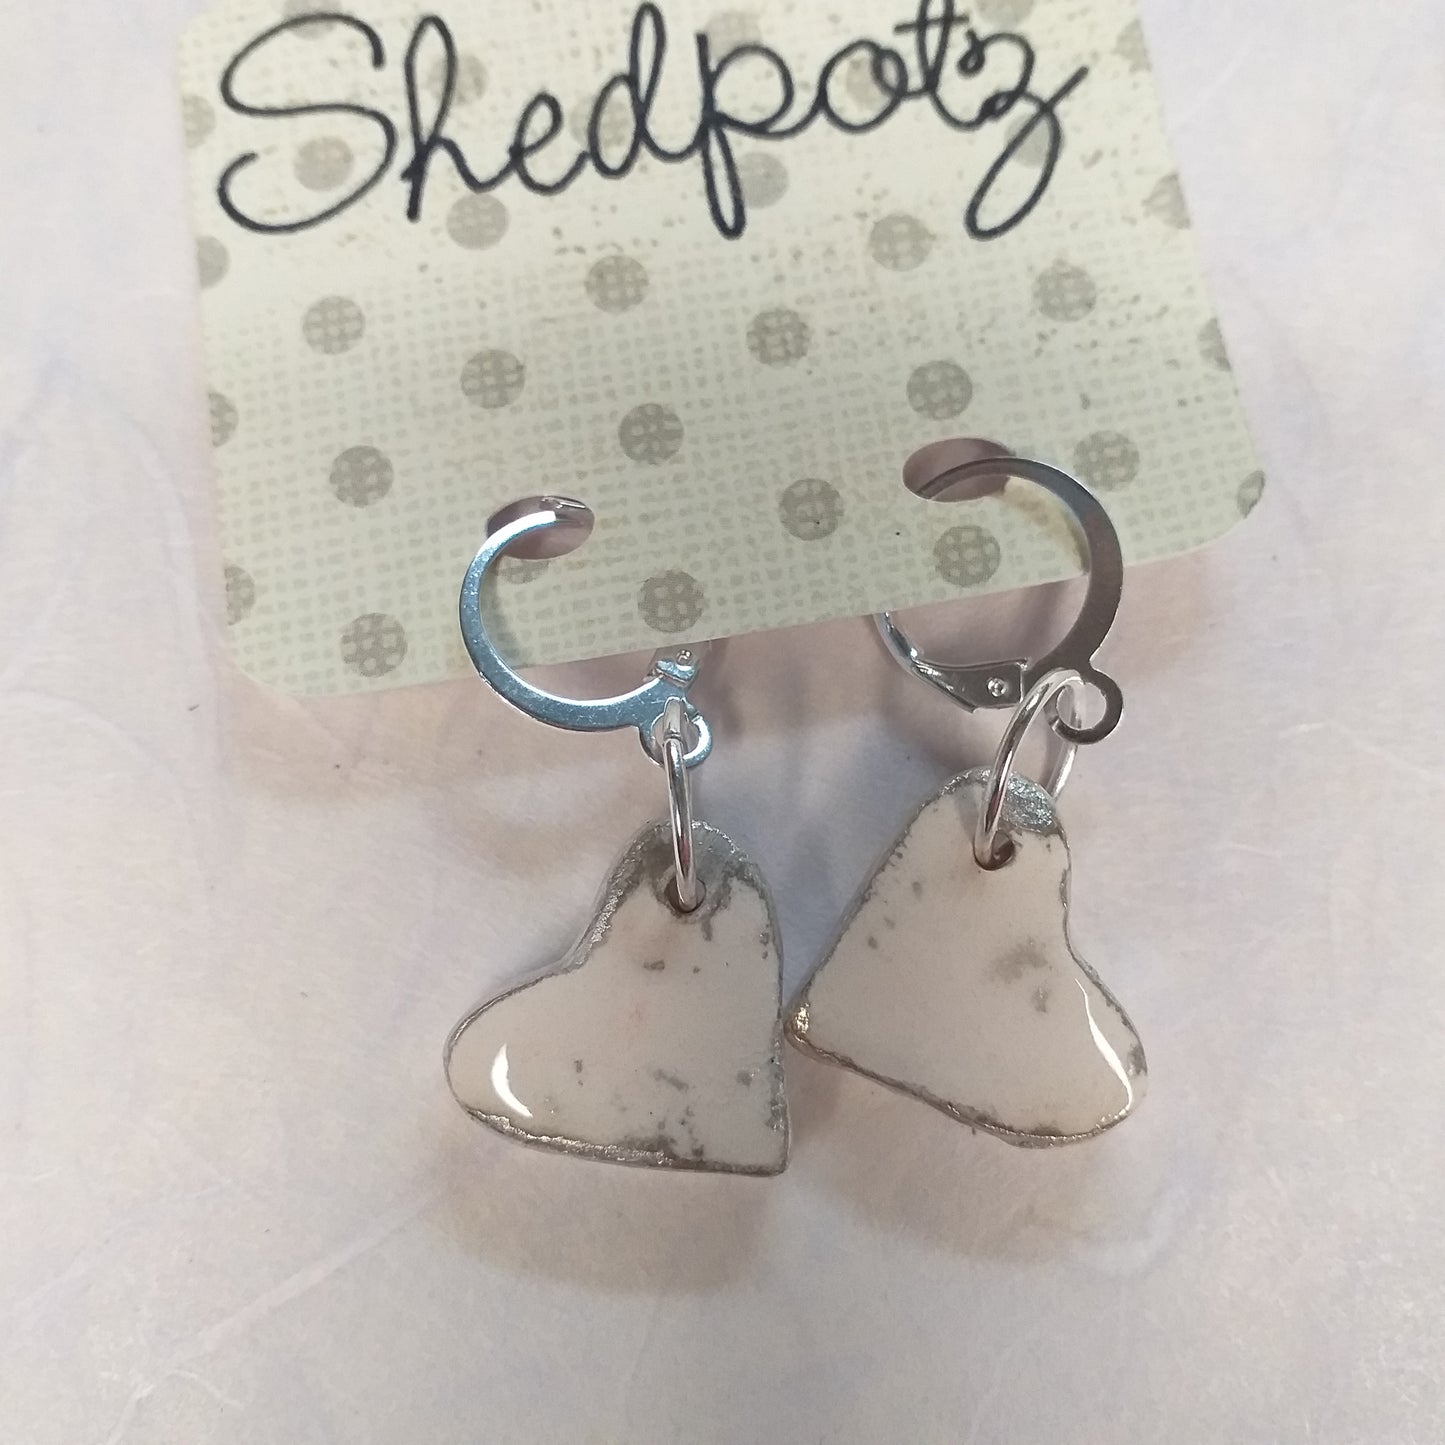 Clay and Fine Silver Earrings